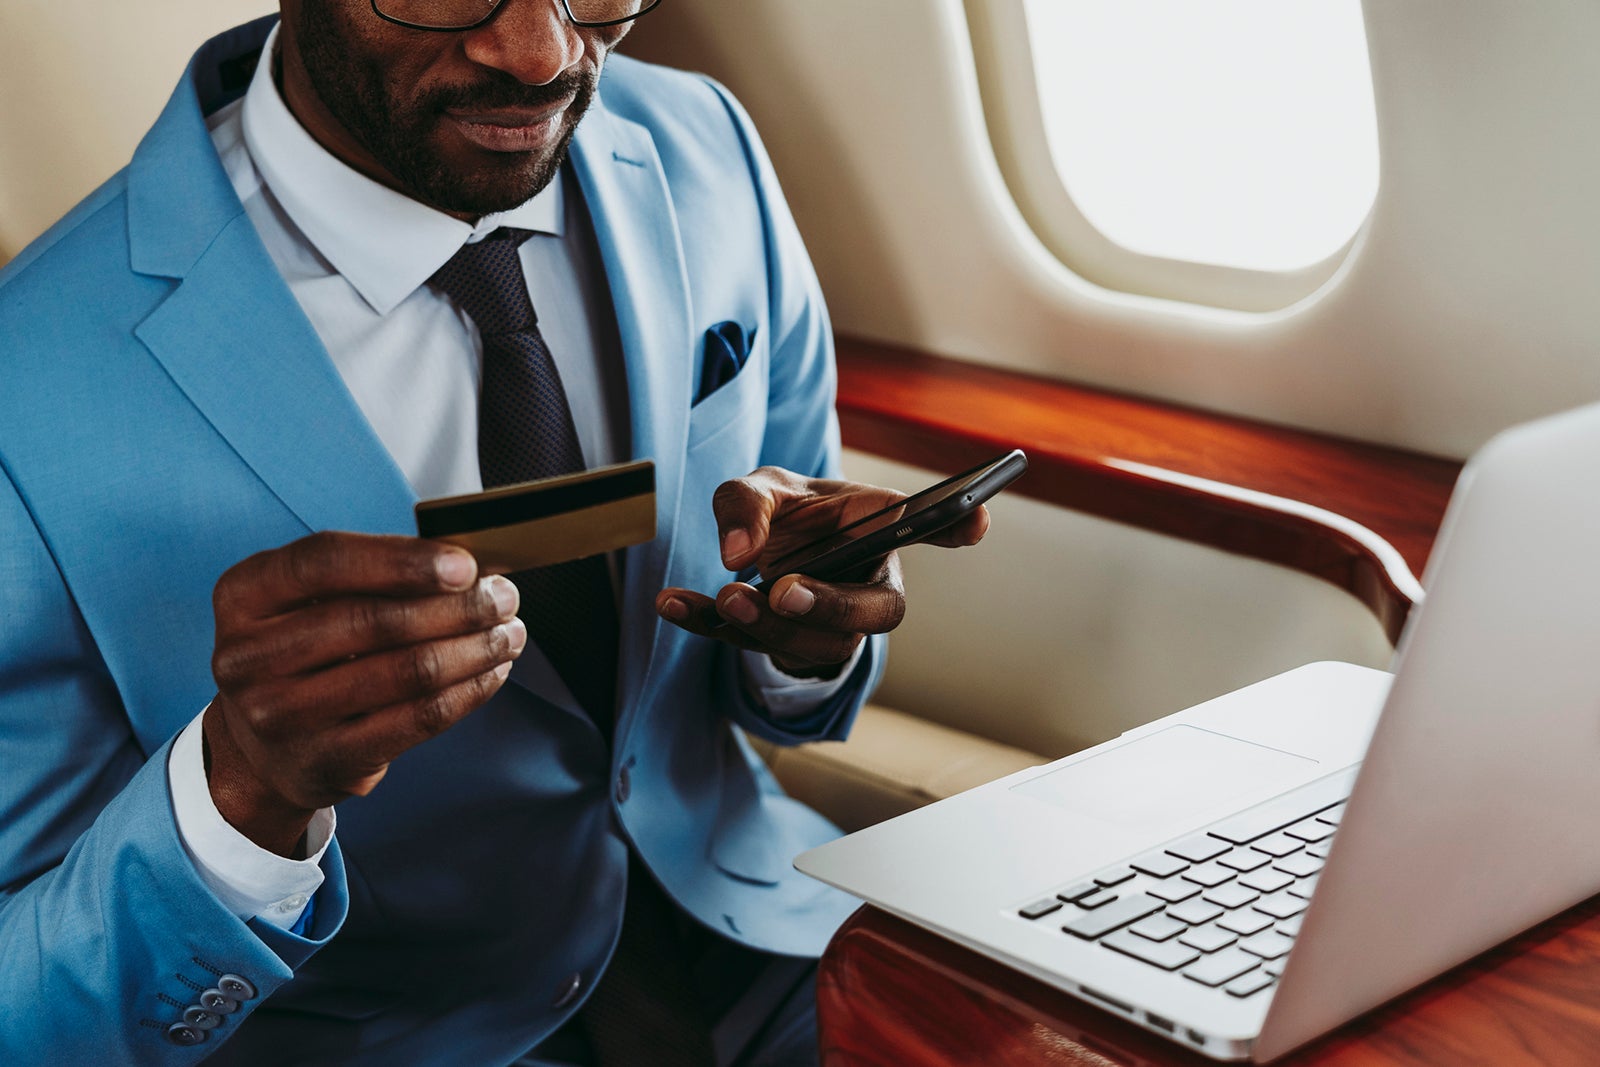 a man makes a credit card payment on his laptop during a flight